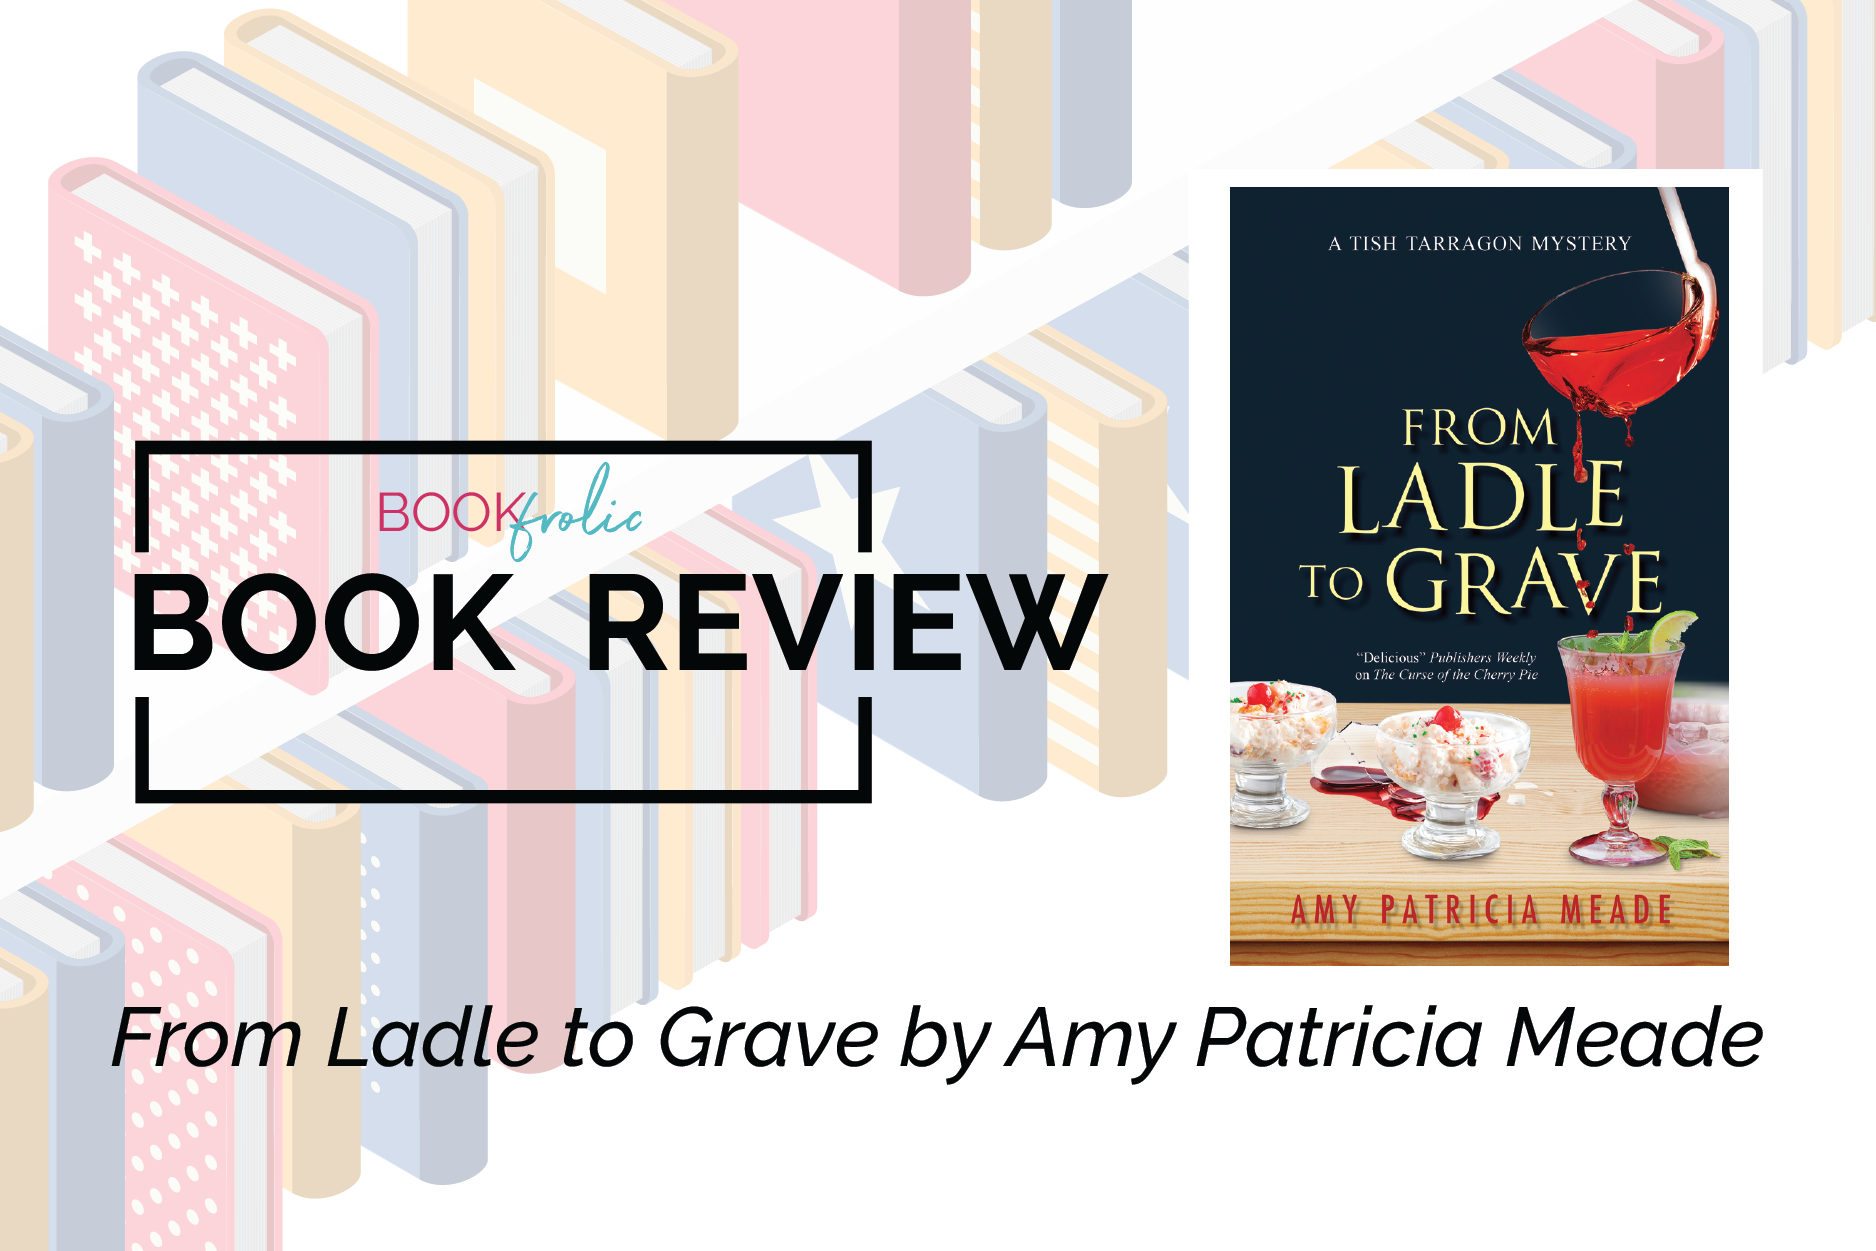 From Ladle to Grave by Amy Patricia Meade - book review banner